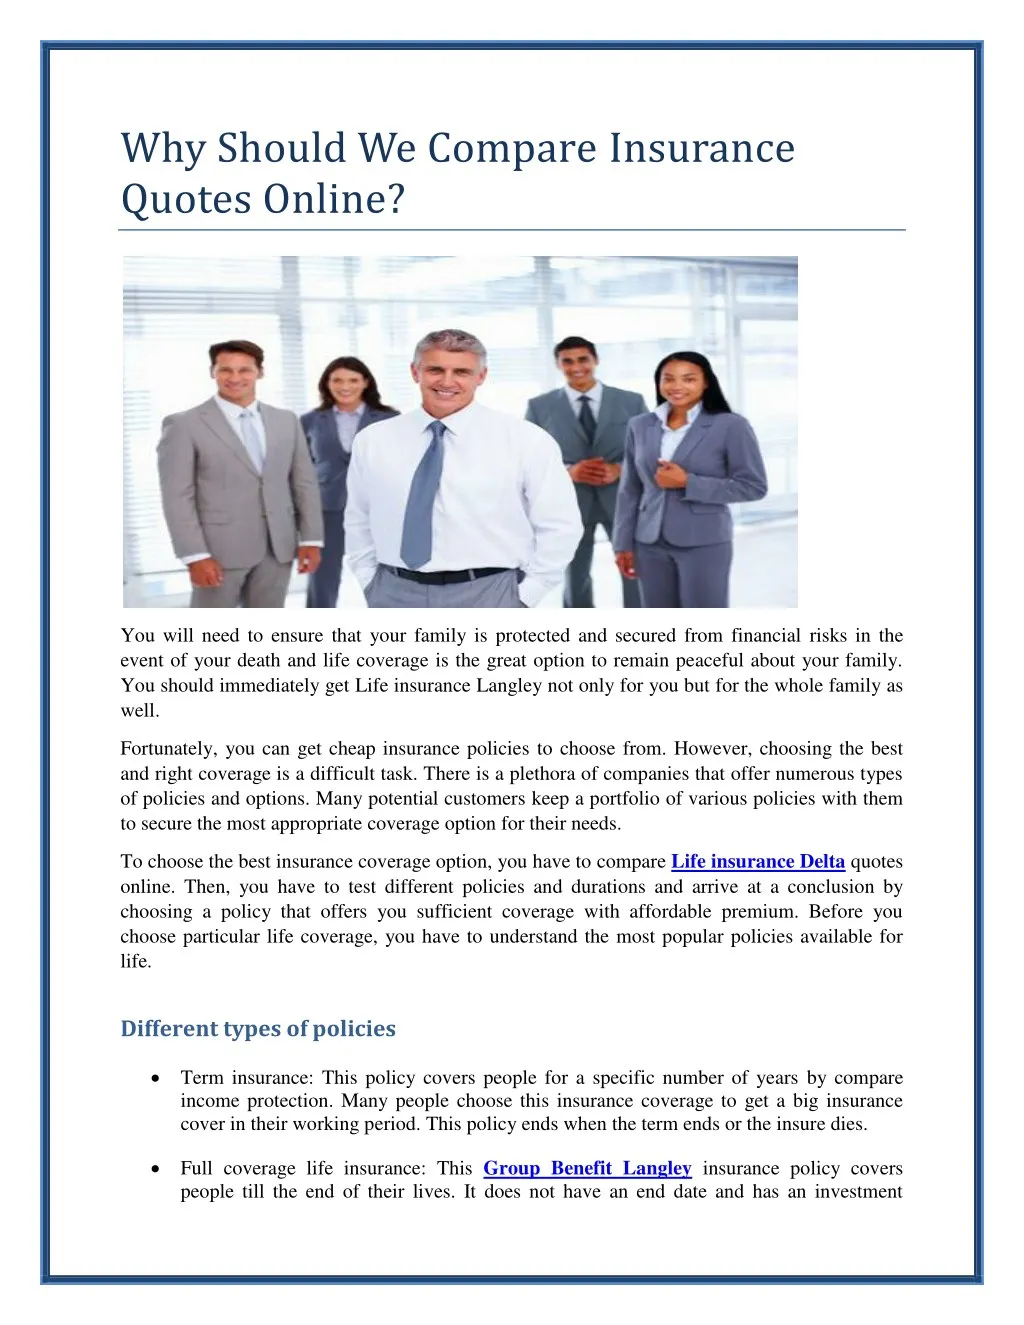 why should we compare insurance quotes online